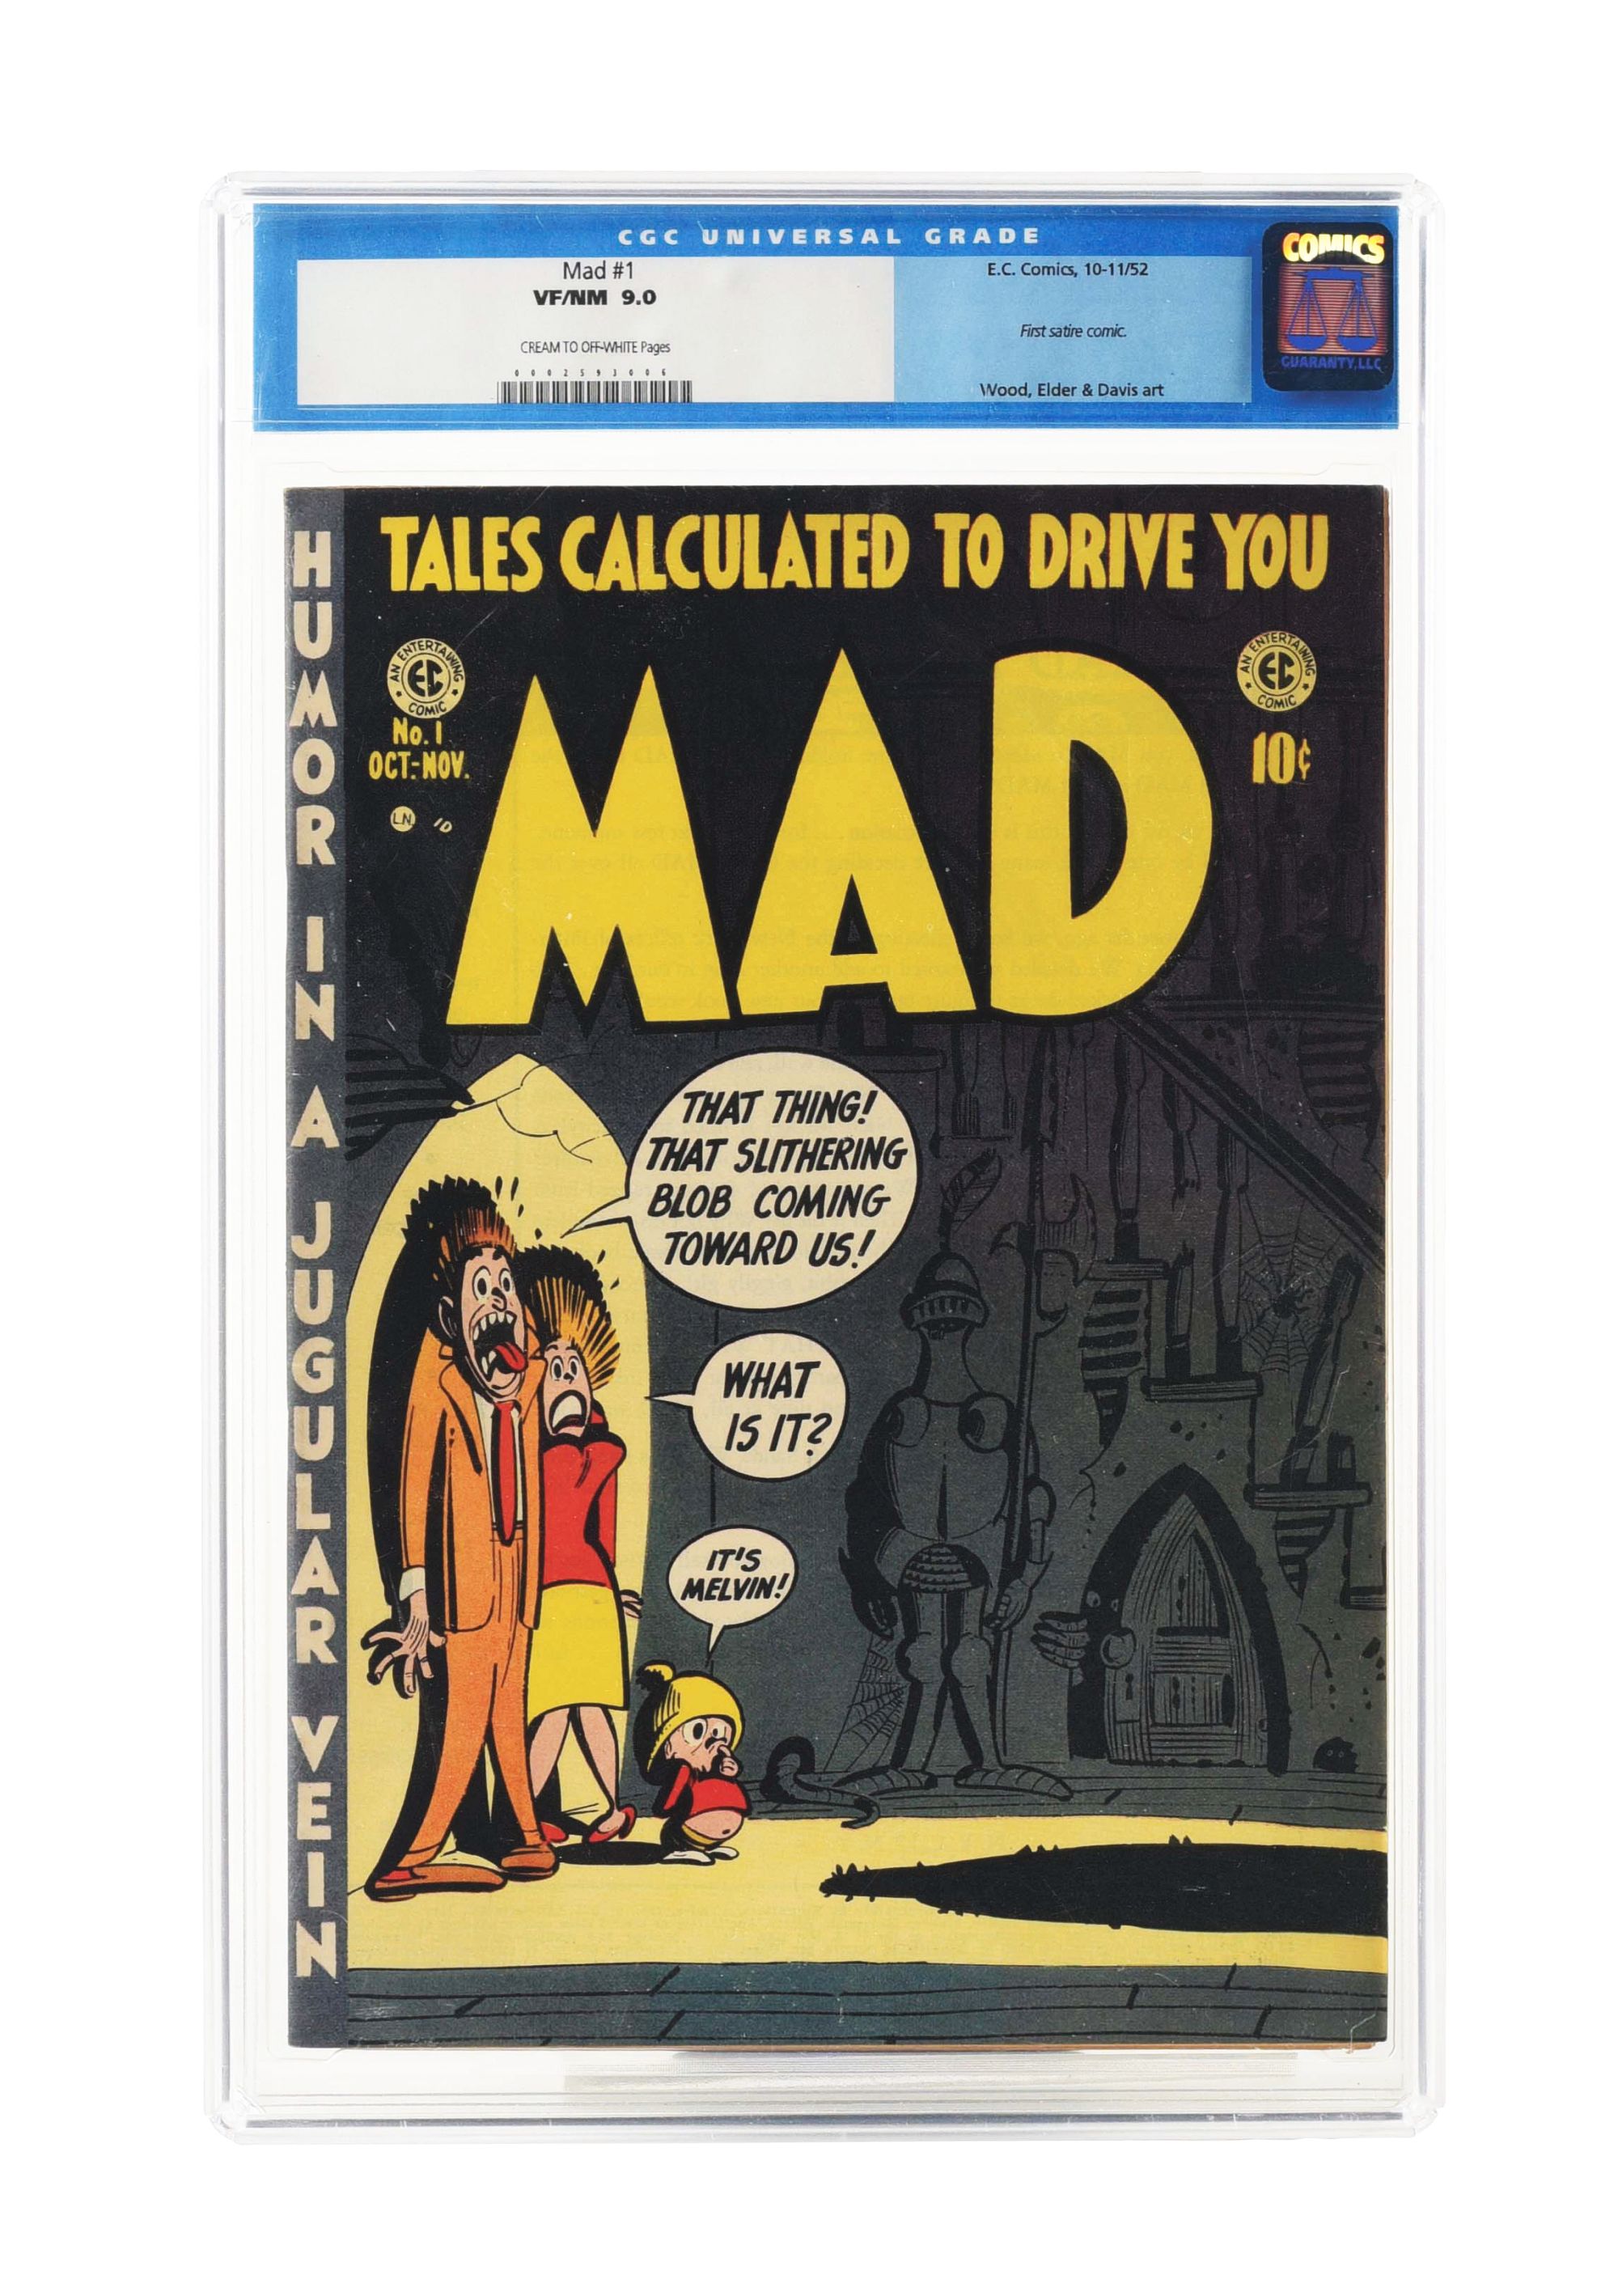 Extremely rare MAD Magazine #1, encased and in CGC 9.0 condition. From a 20+ year collection. Estimate $9,000-$14,000